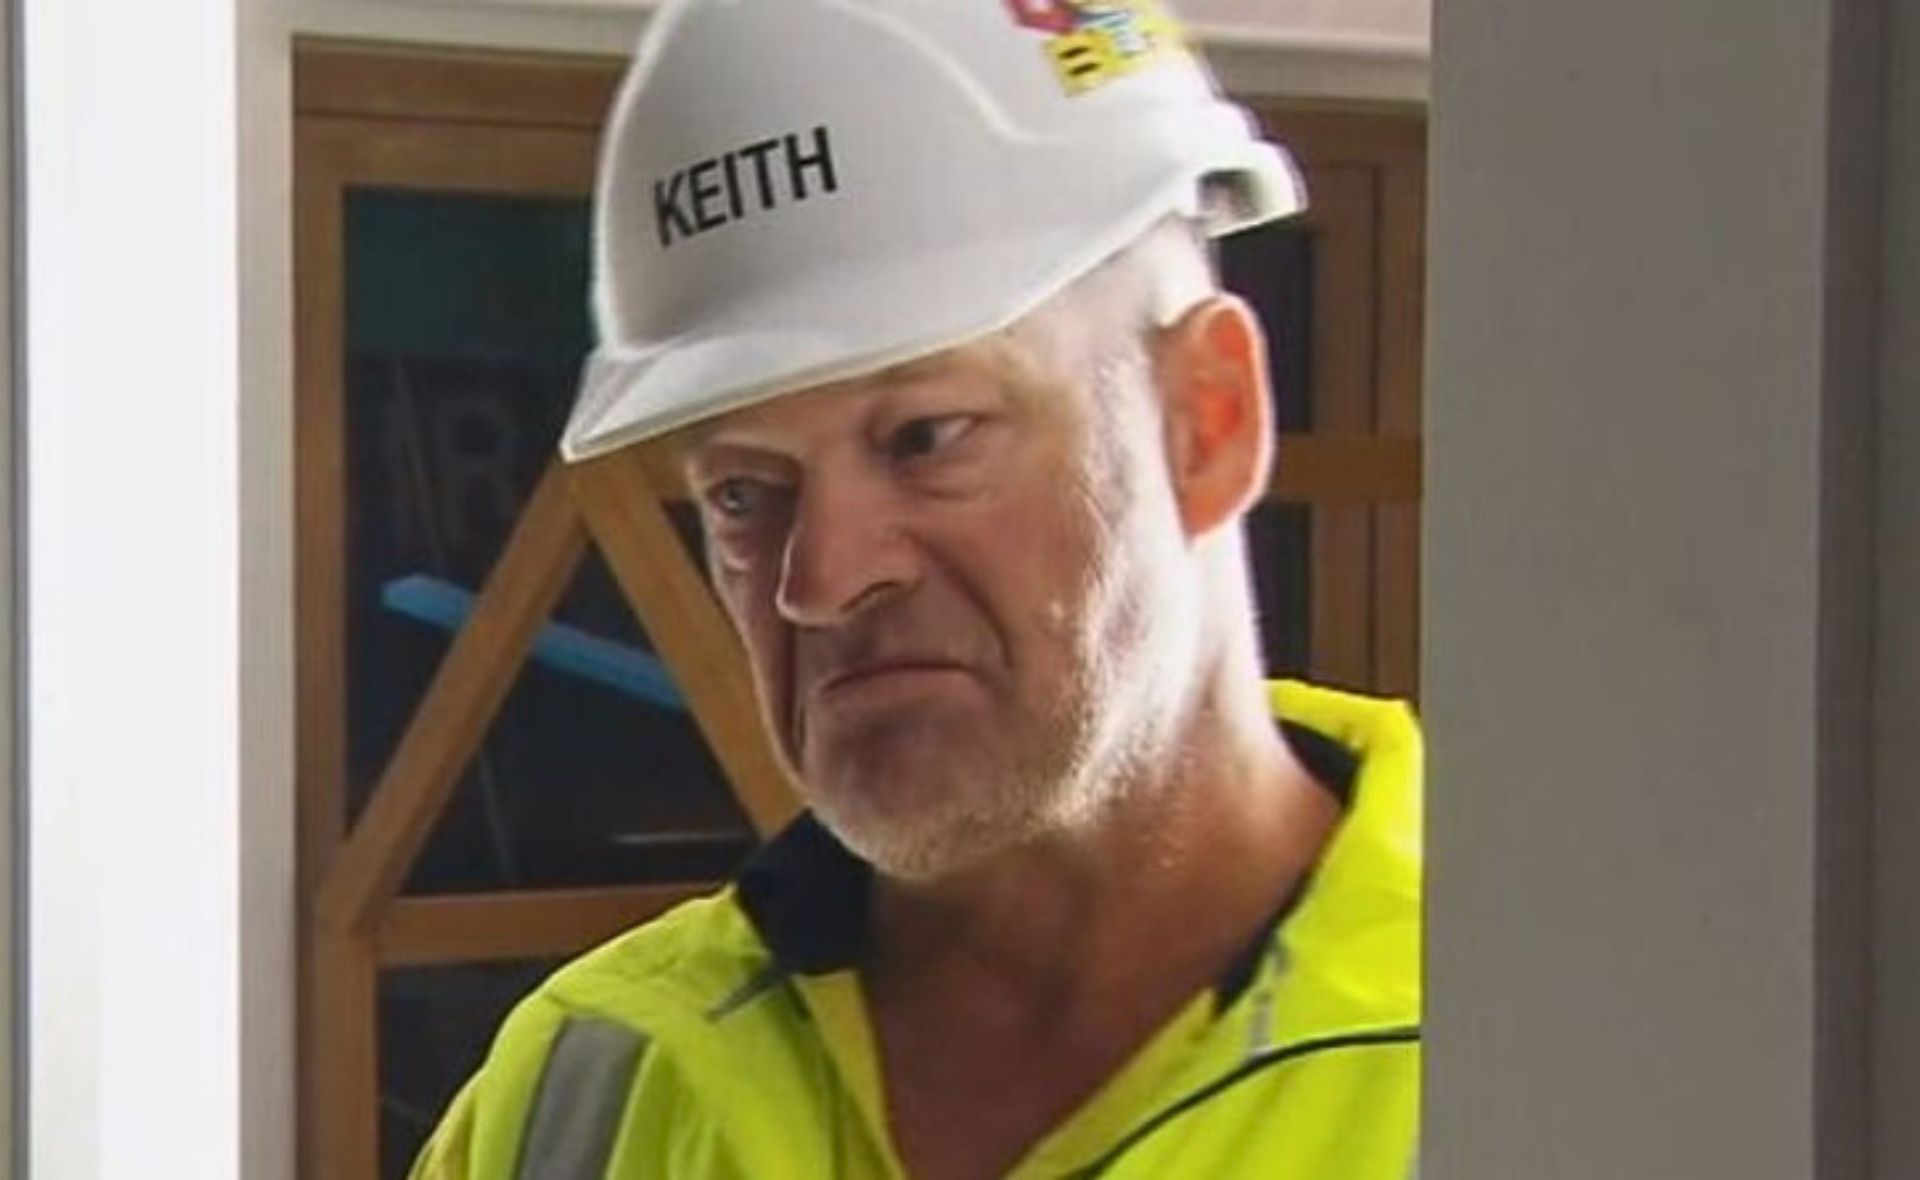 The Block’s foremen Keith and Dan are refusing to help contestants